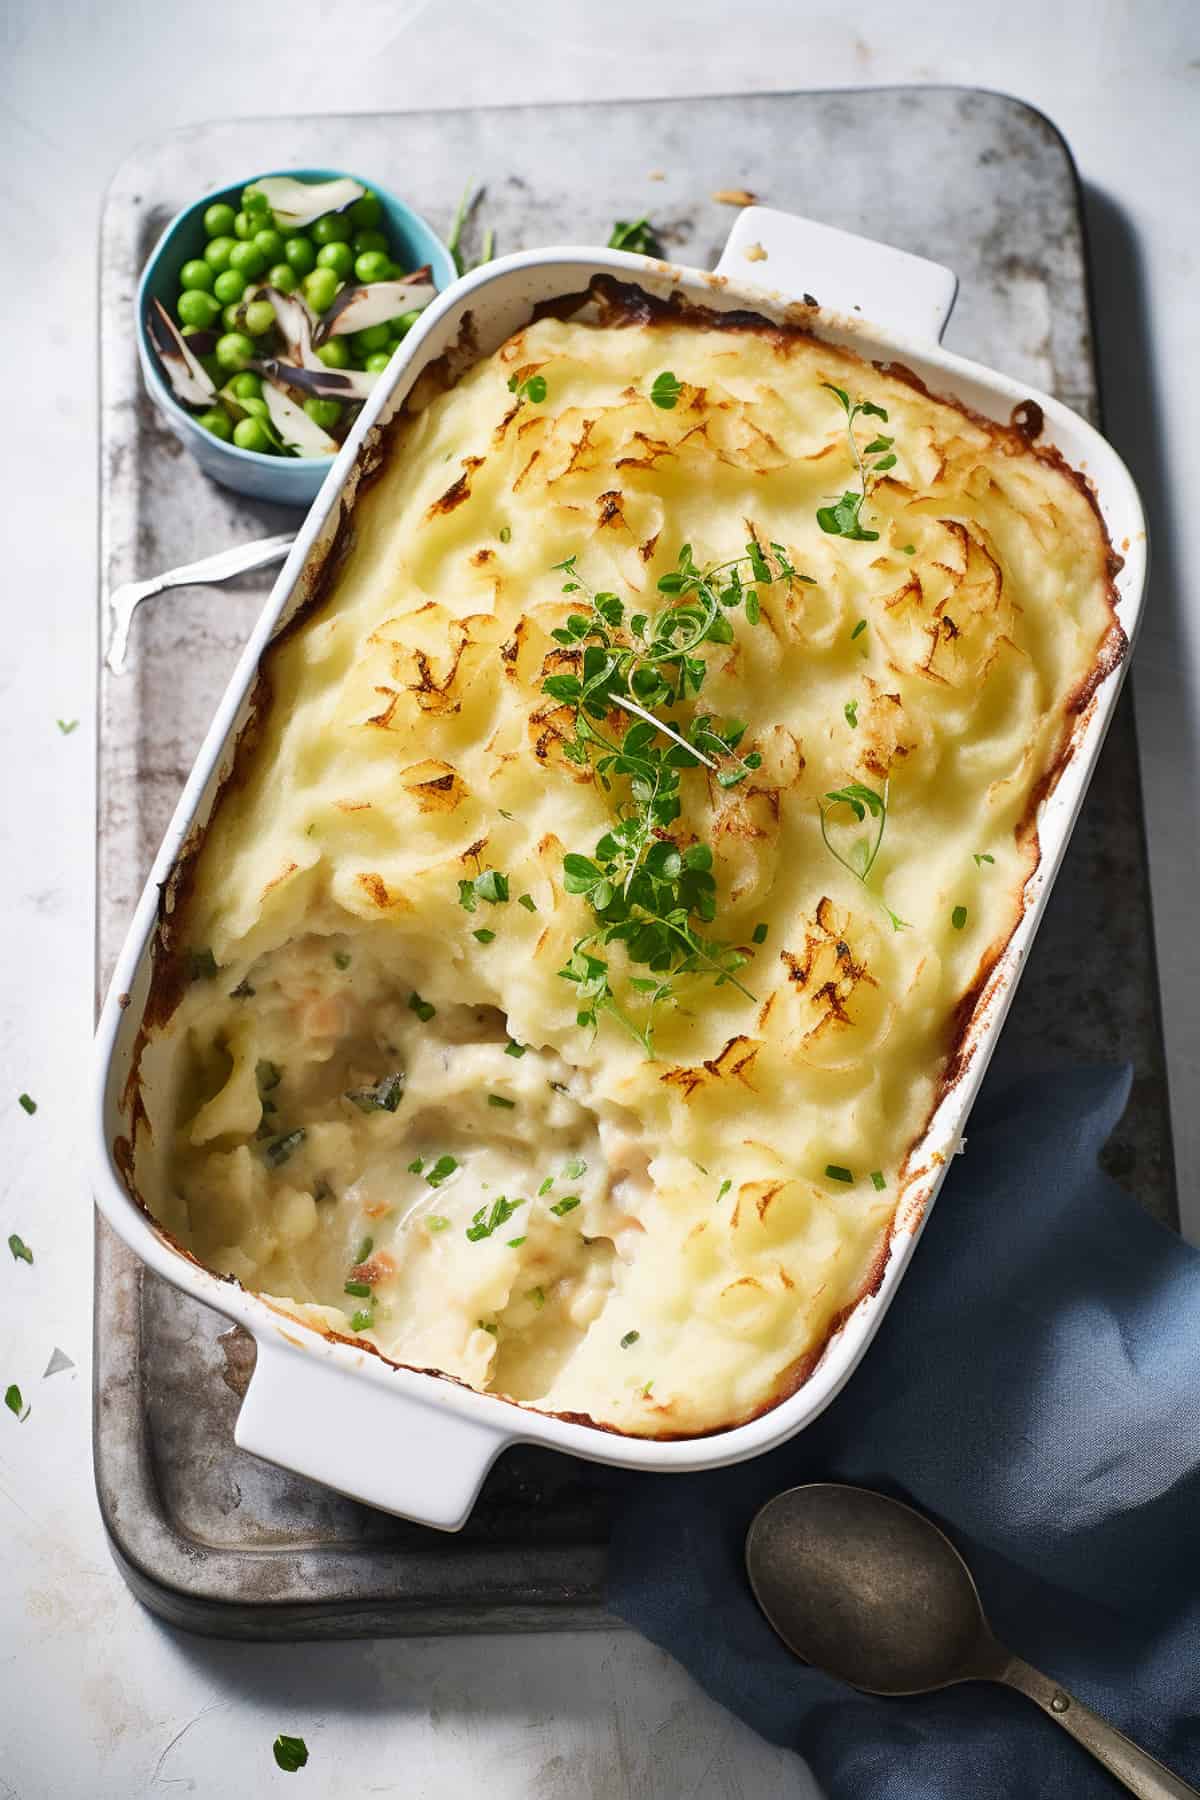 Fish pie in a baking dish with mashed potato topping.